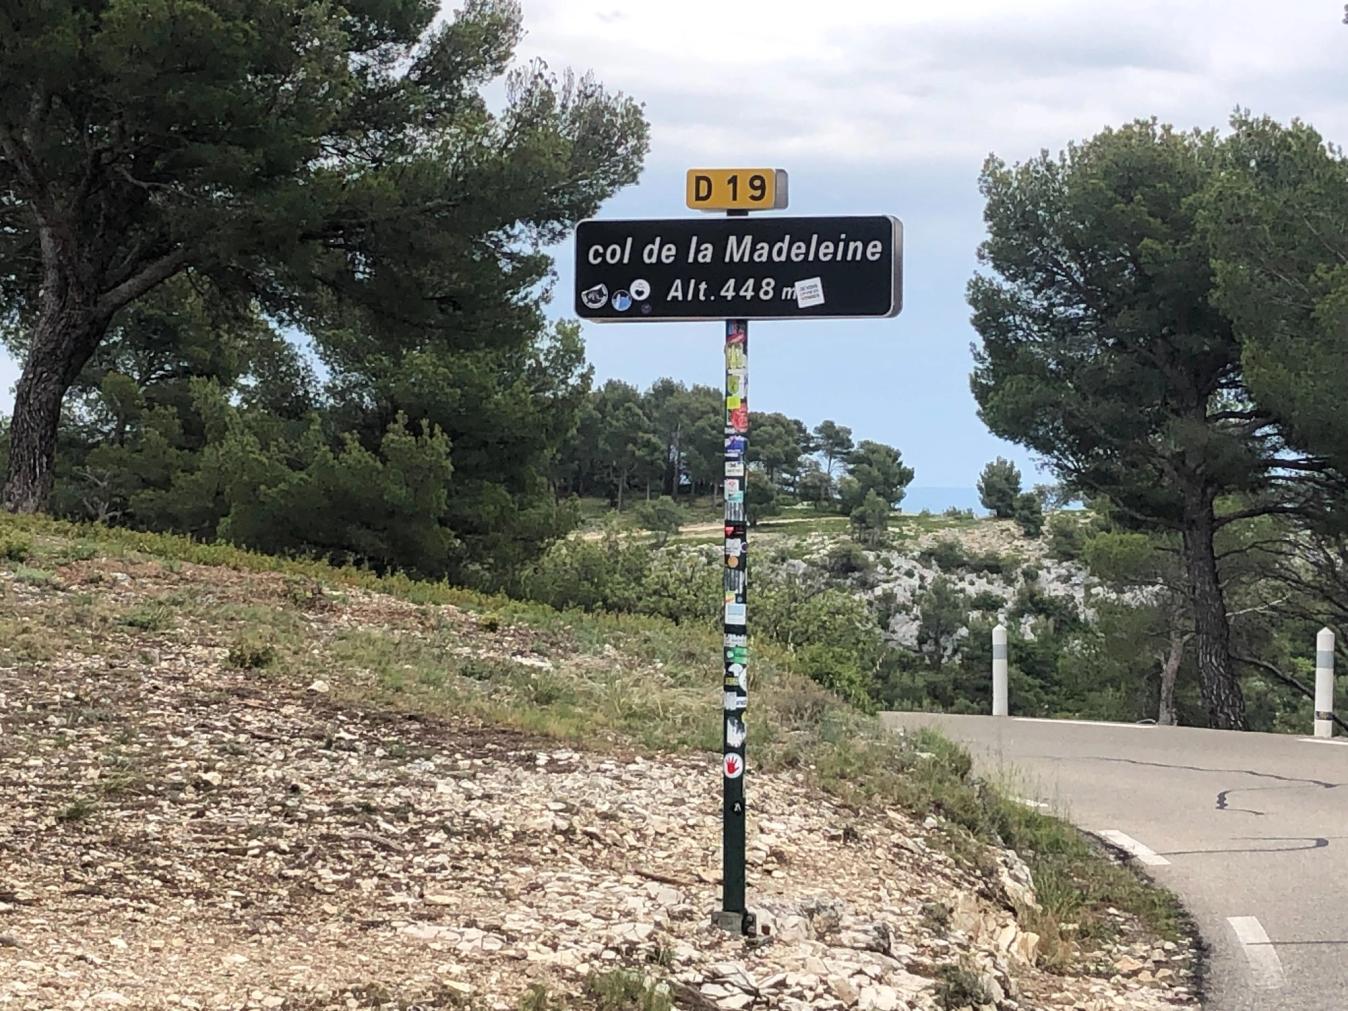 Not to be confused with its more infamous alpine namesake, the Col de la Madeleine marks the first categorised difficulty of the Mont Ventoux Dénivelé Challenge